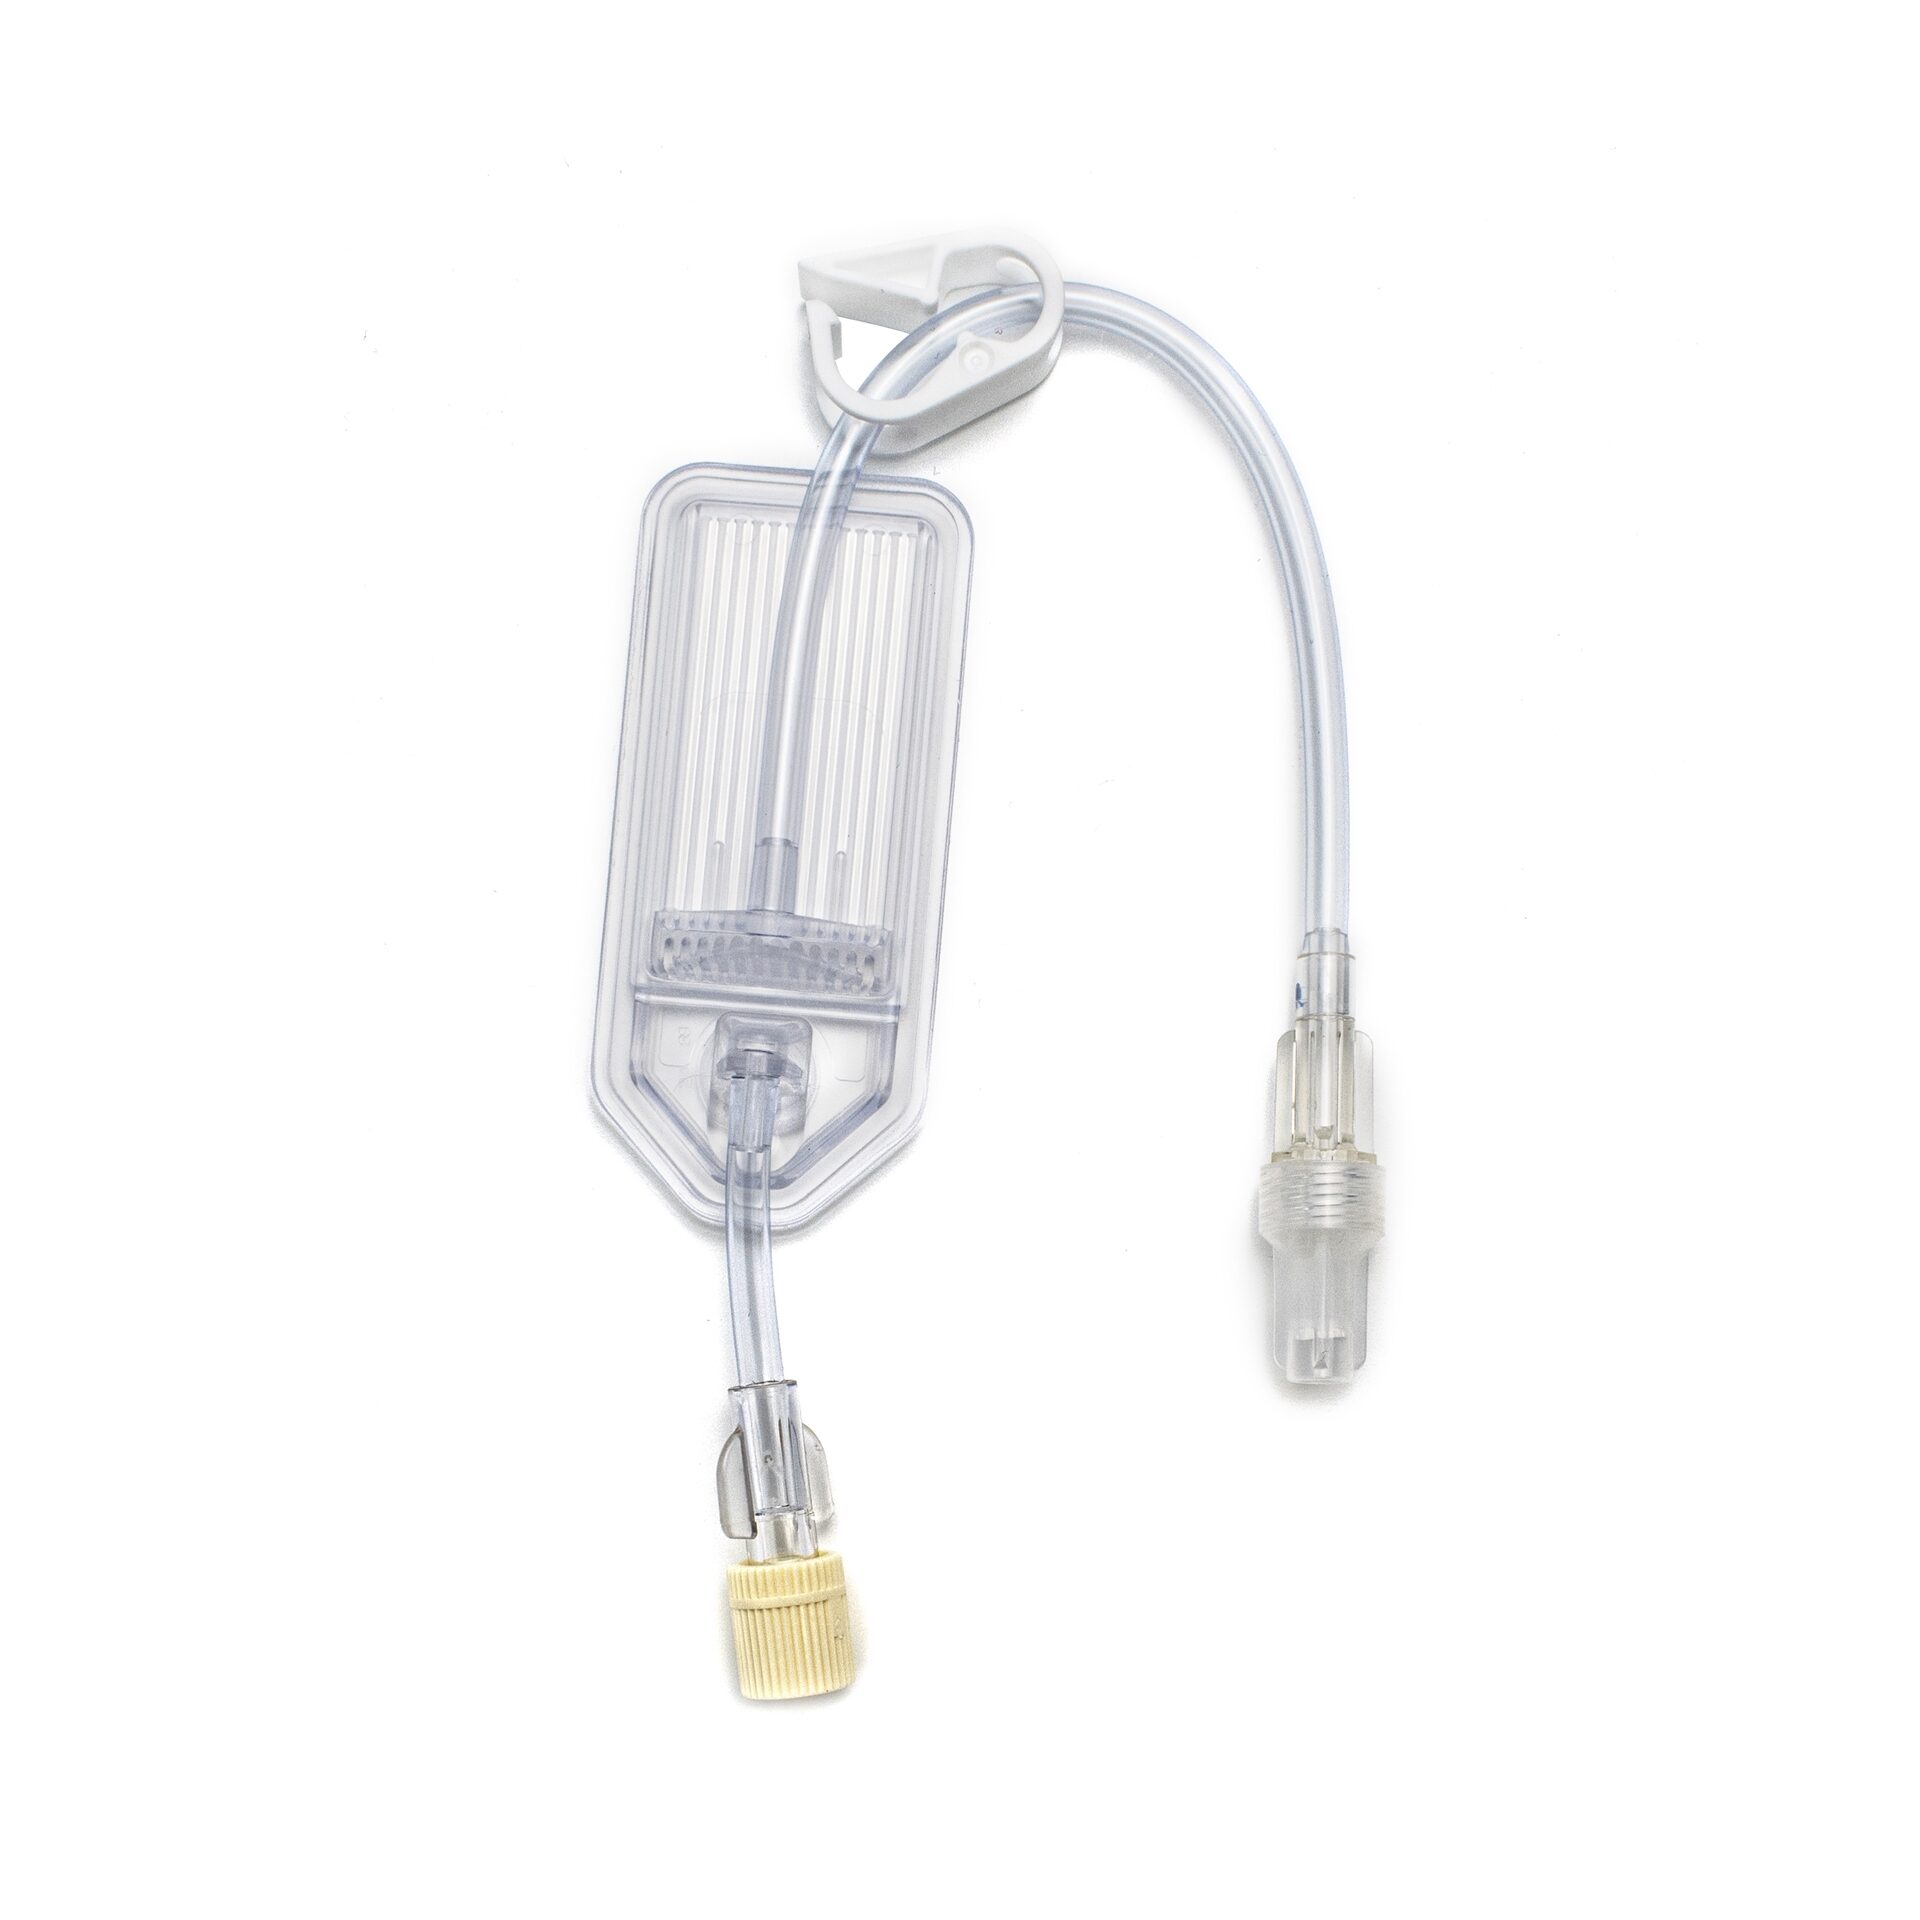 IV Extension Set, 0.2 Micron Filter, On/Off Clamp, Luer-Lock